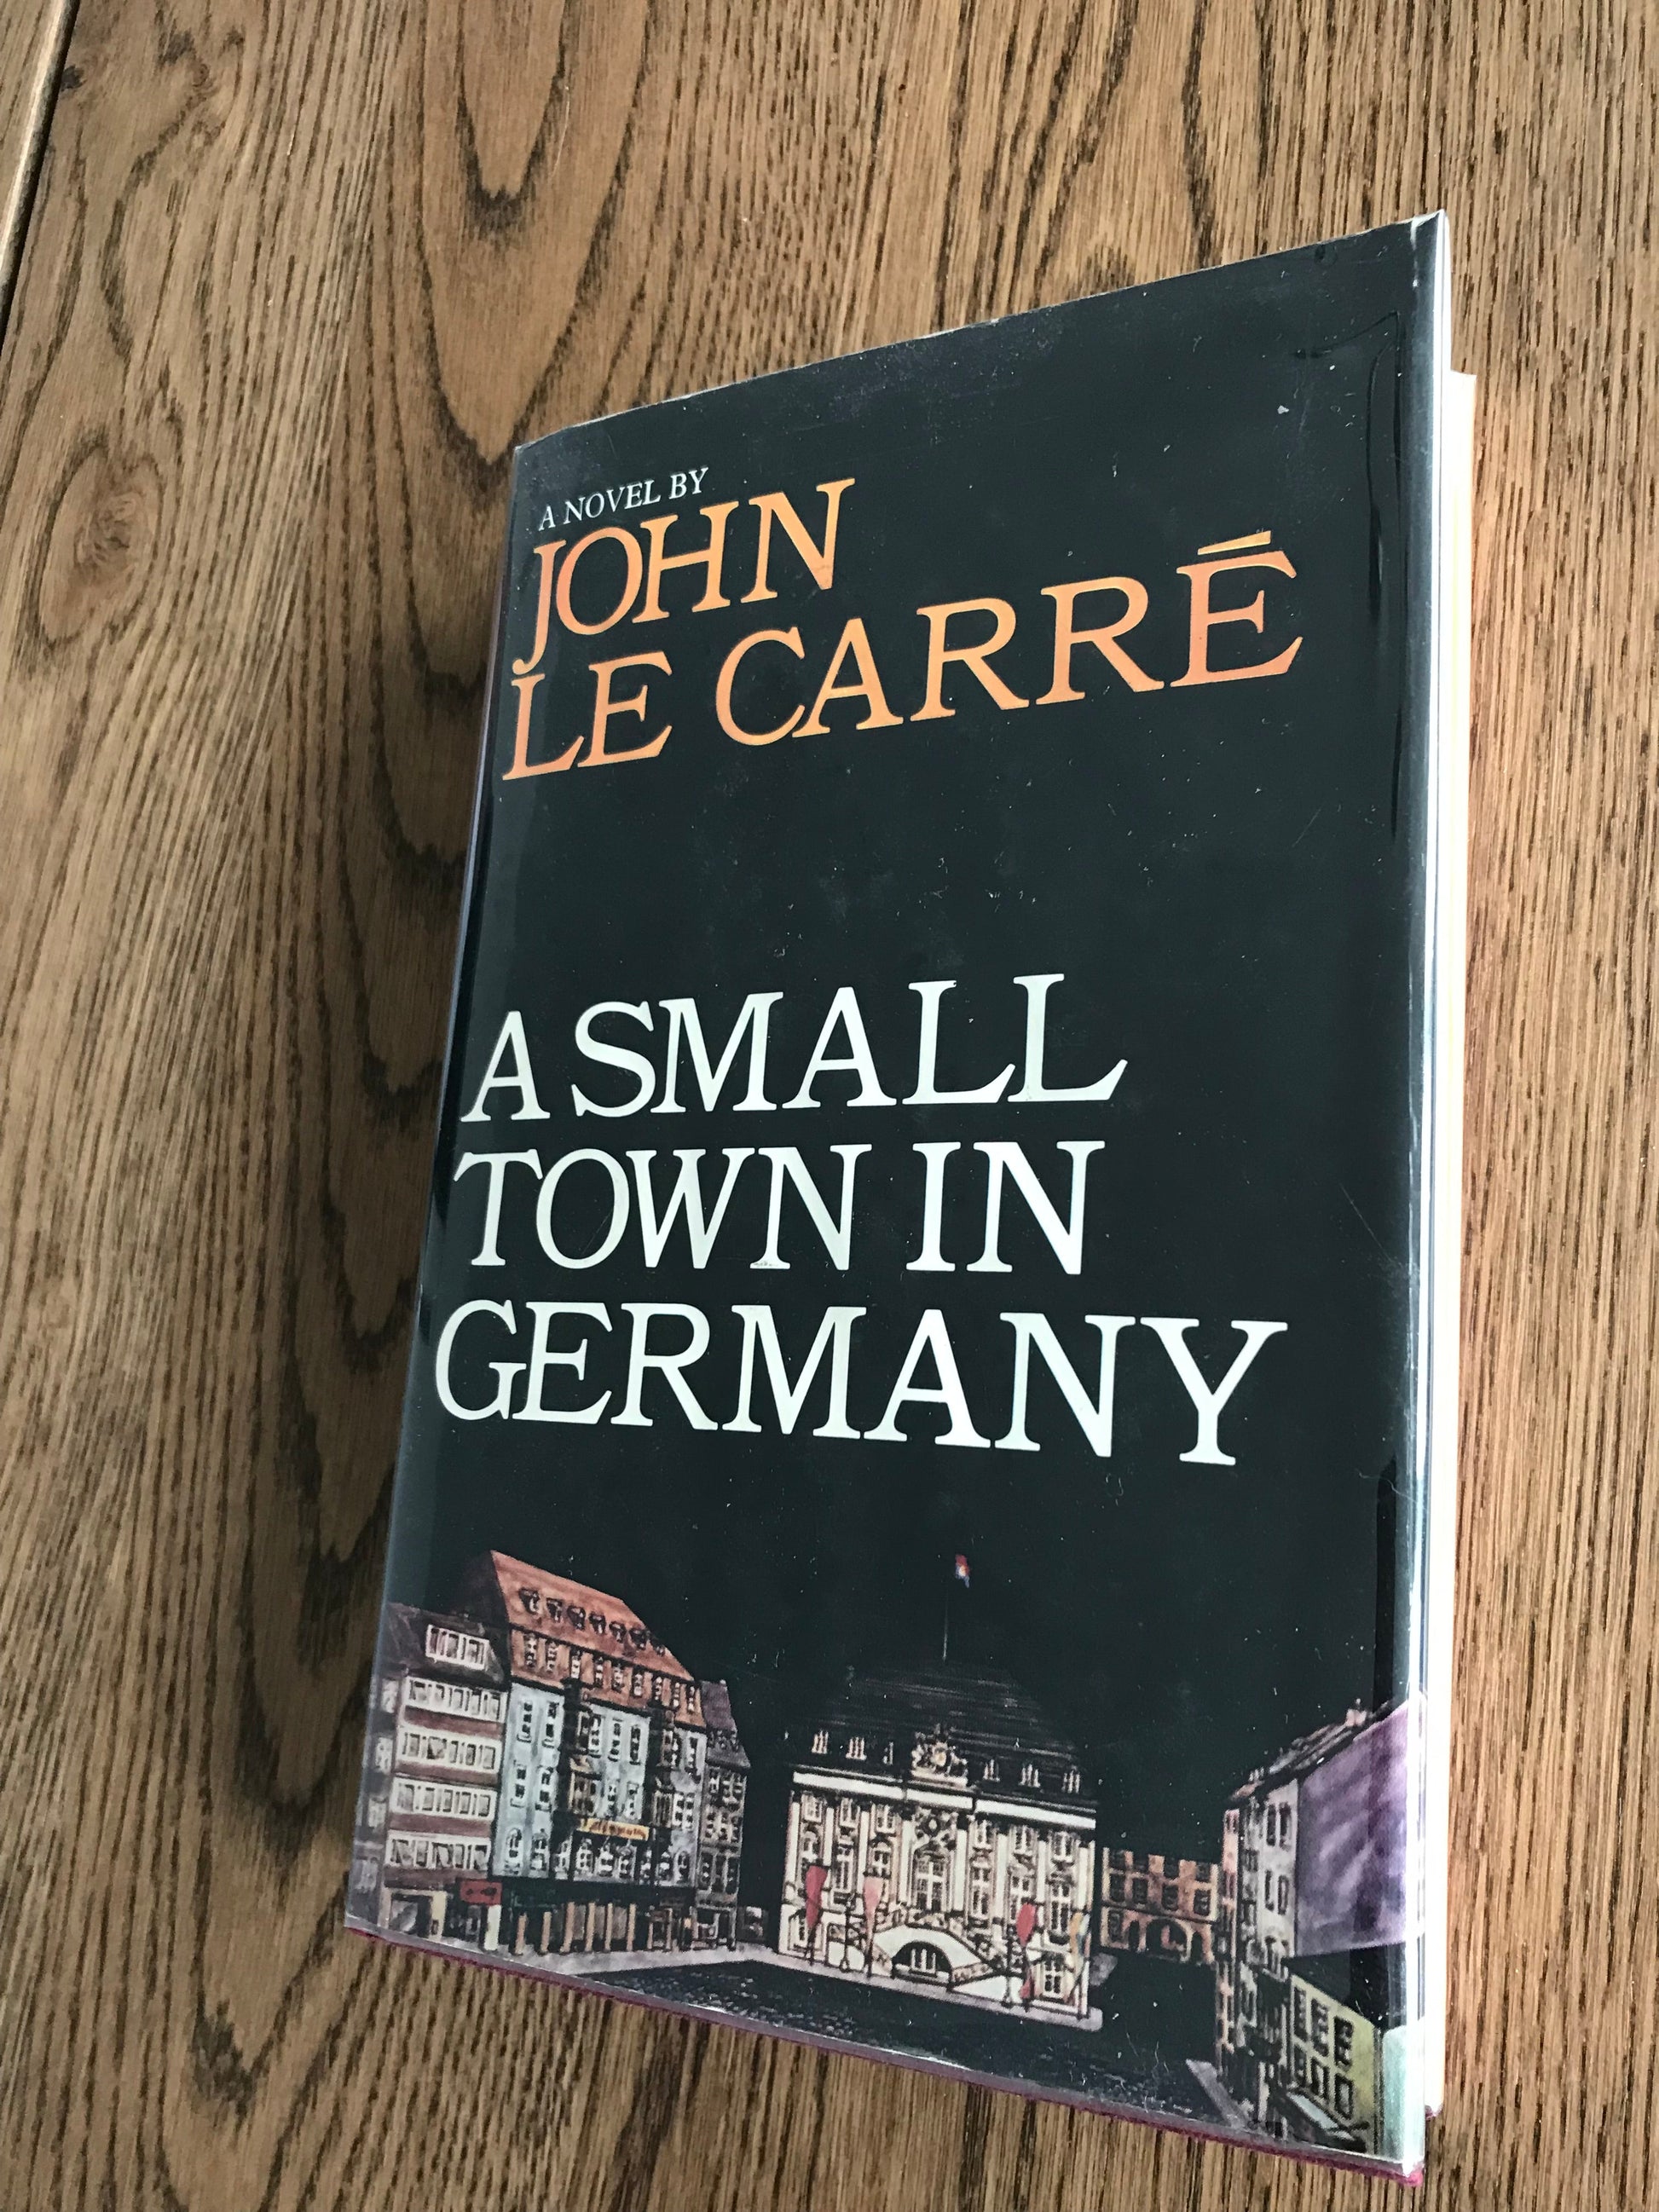 A SMALL TOWN IN GERMANY -  JOHN LE CARRE BooksCardsNBikes